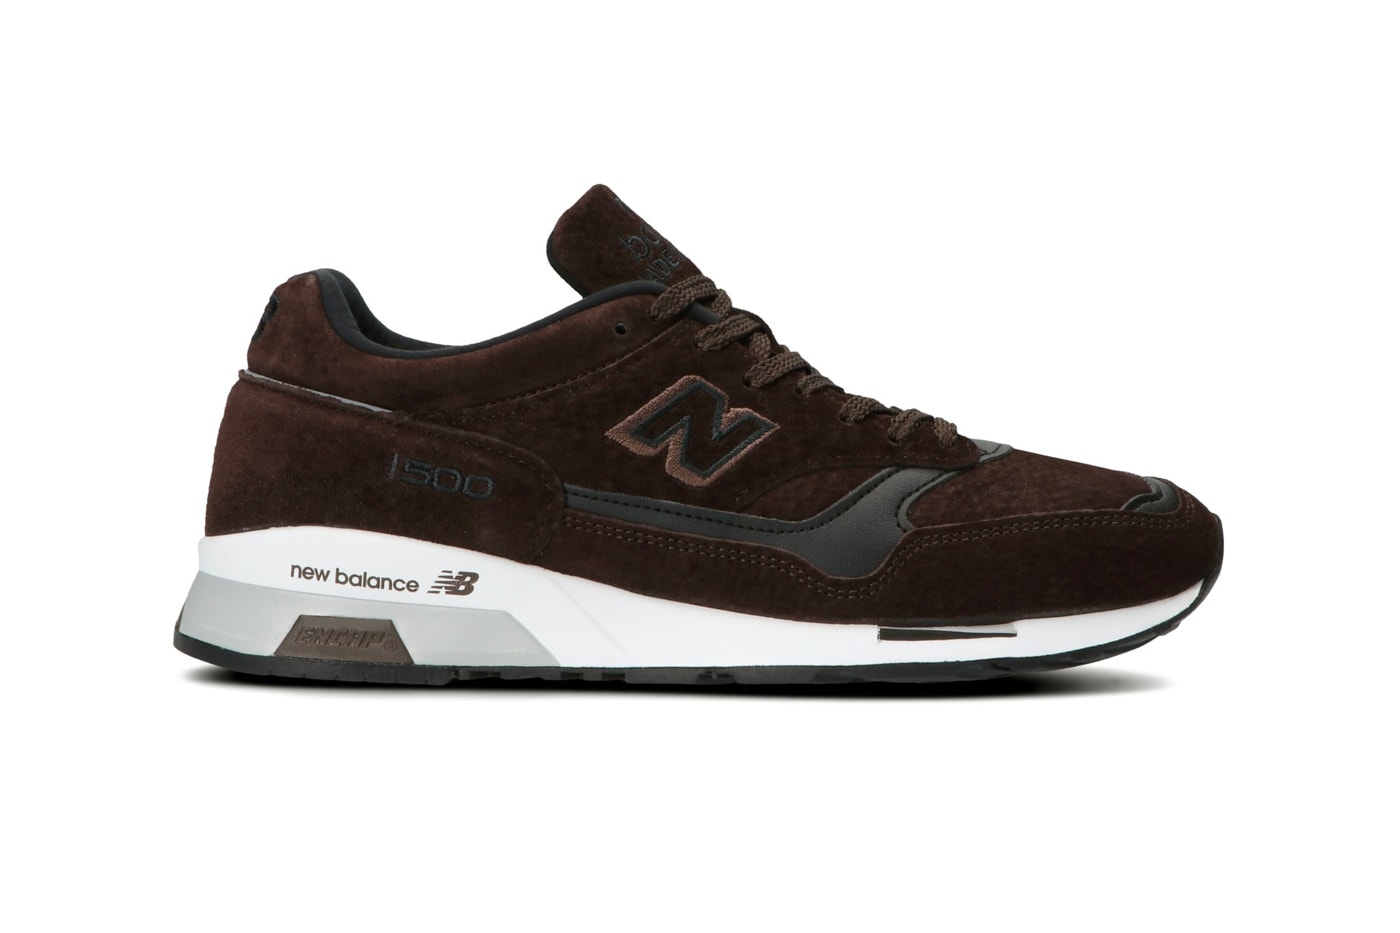 UNITED ARROWS x New Balance 30th Anniversary M1500 made in USA shoes kicks footwear trainers Japan Toyko 